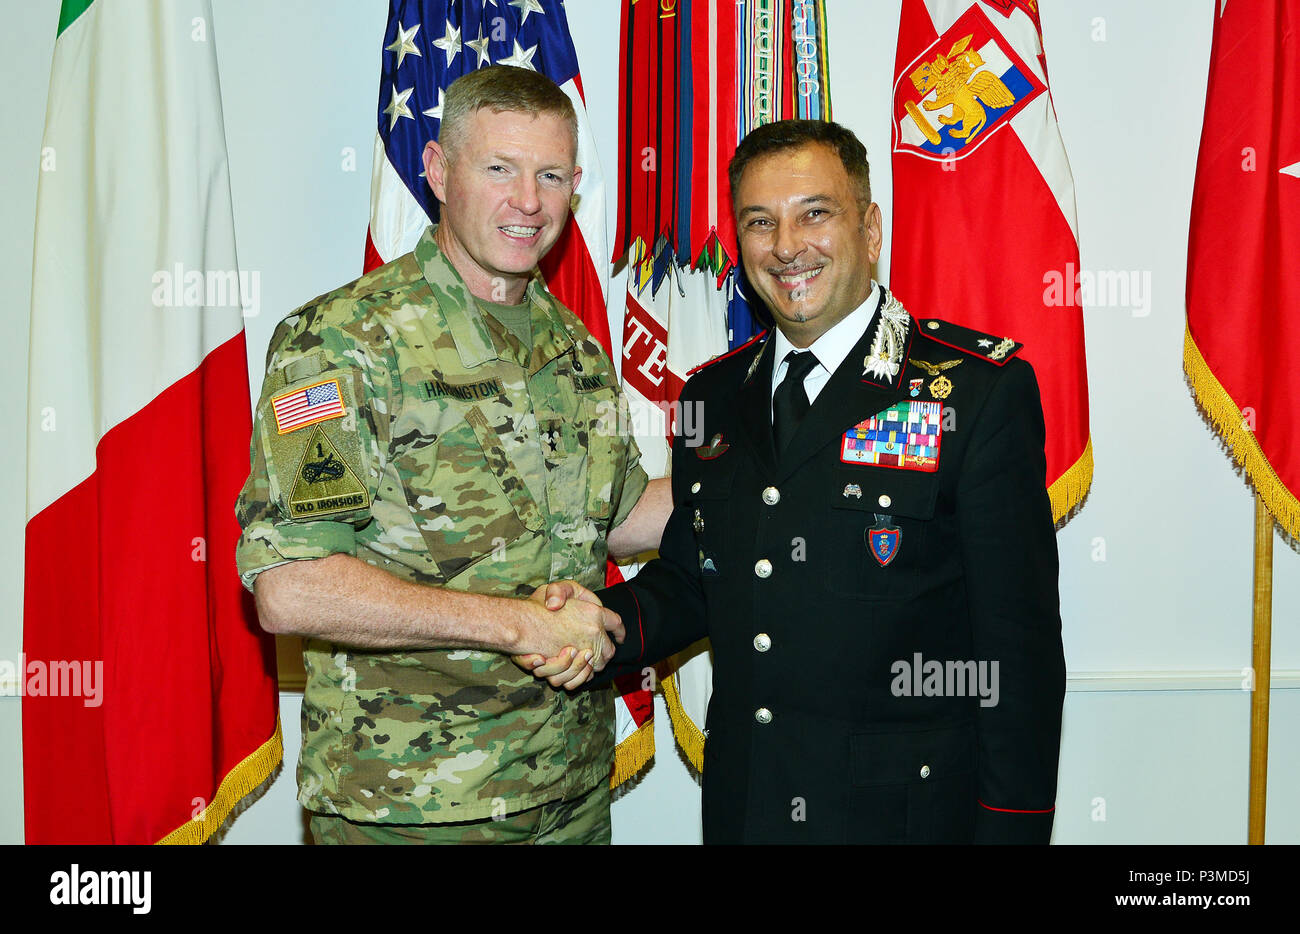 From left, Maj. Gen. Joseph P. Harrington, U.S. Army Africa Commanding General, and Brig. Gen. Giovanni Pietro Barbano, the new Director of the Center of Excellence for Stability Police Units (COESPU); pose for a photograph in the USARAF commander's office during a recent visit to Caserma Ederle, Vicenza, Italy July 12, 2016. (Photo by U.S. Army Visual Information Specialist Davide Dalla Massara/Released) Stock Photo